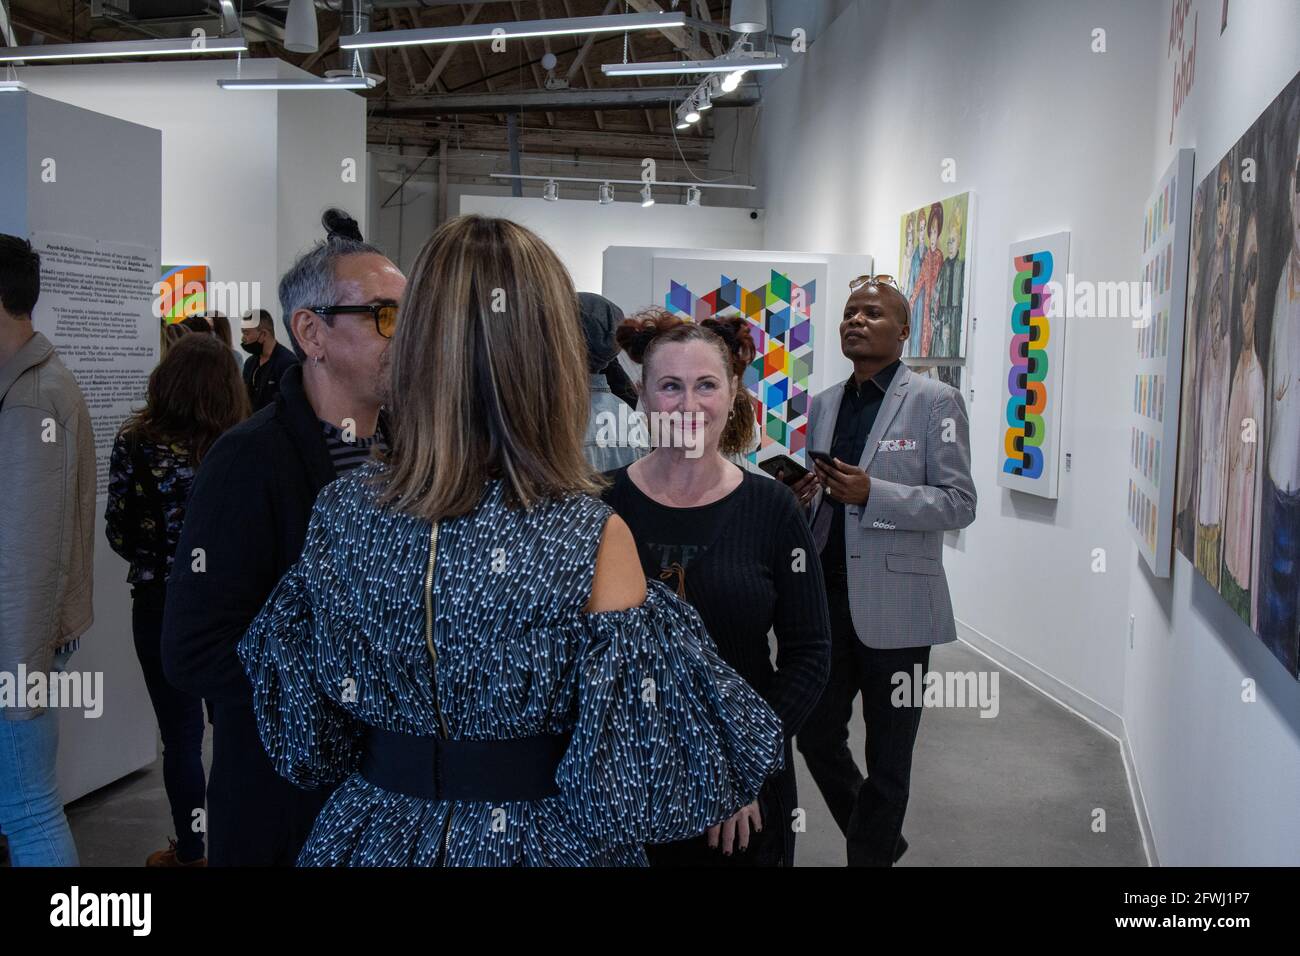 Patrons at Mash art gallery opening of the show Psych-O-Delic. 1st show after 2021 covid 19 restrictions were lifted in Los Angeles. Stock Photo